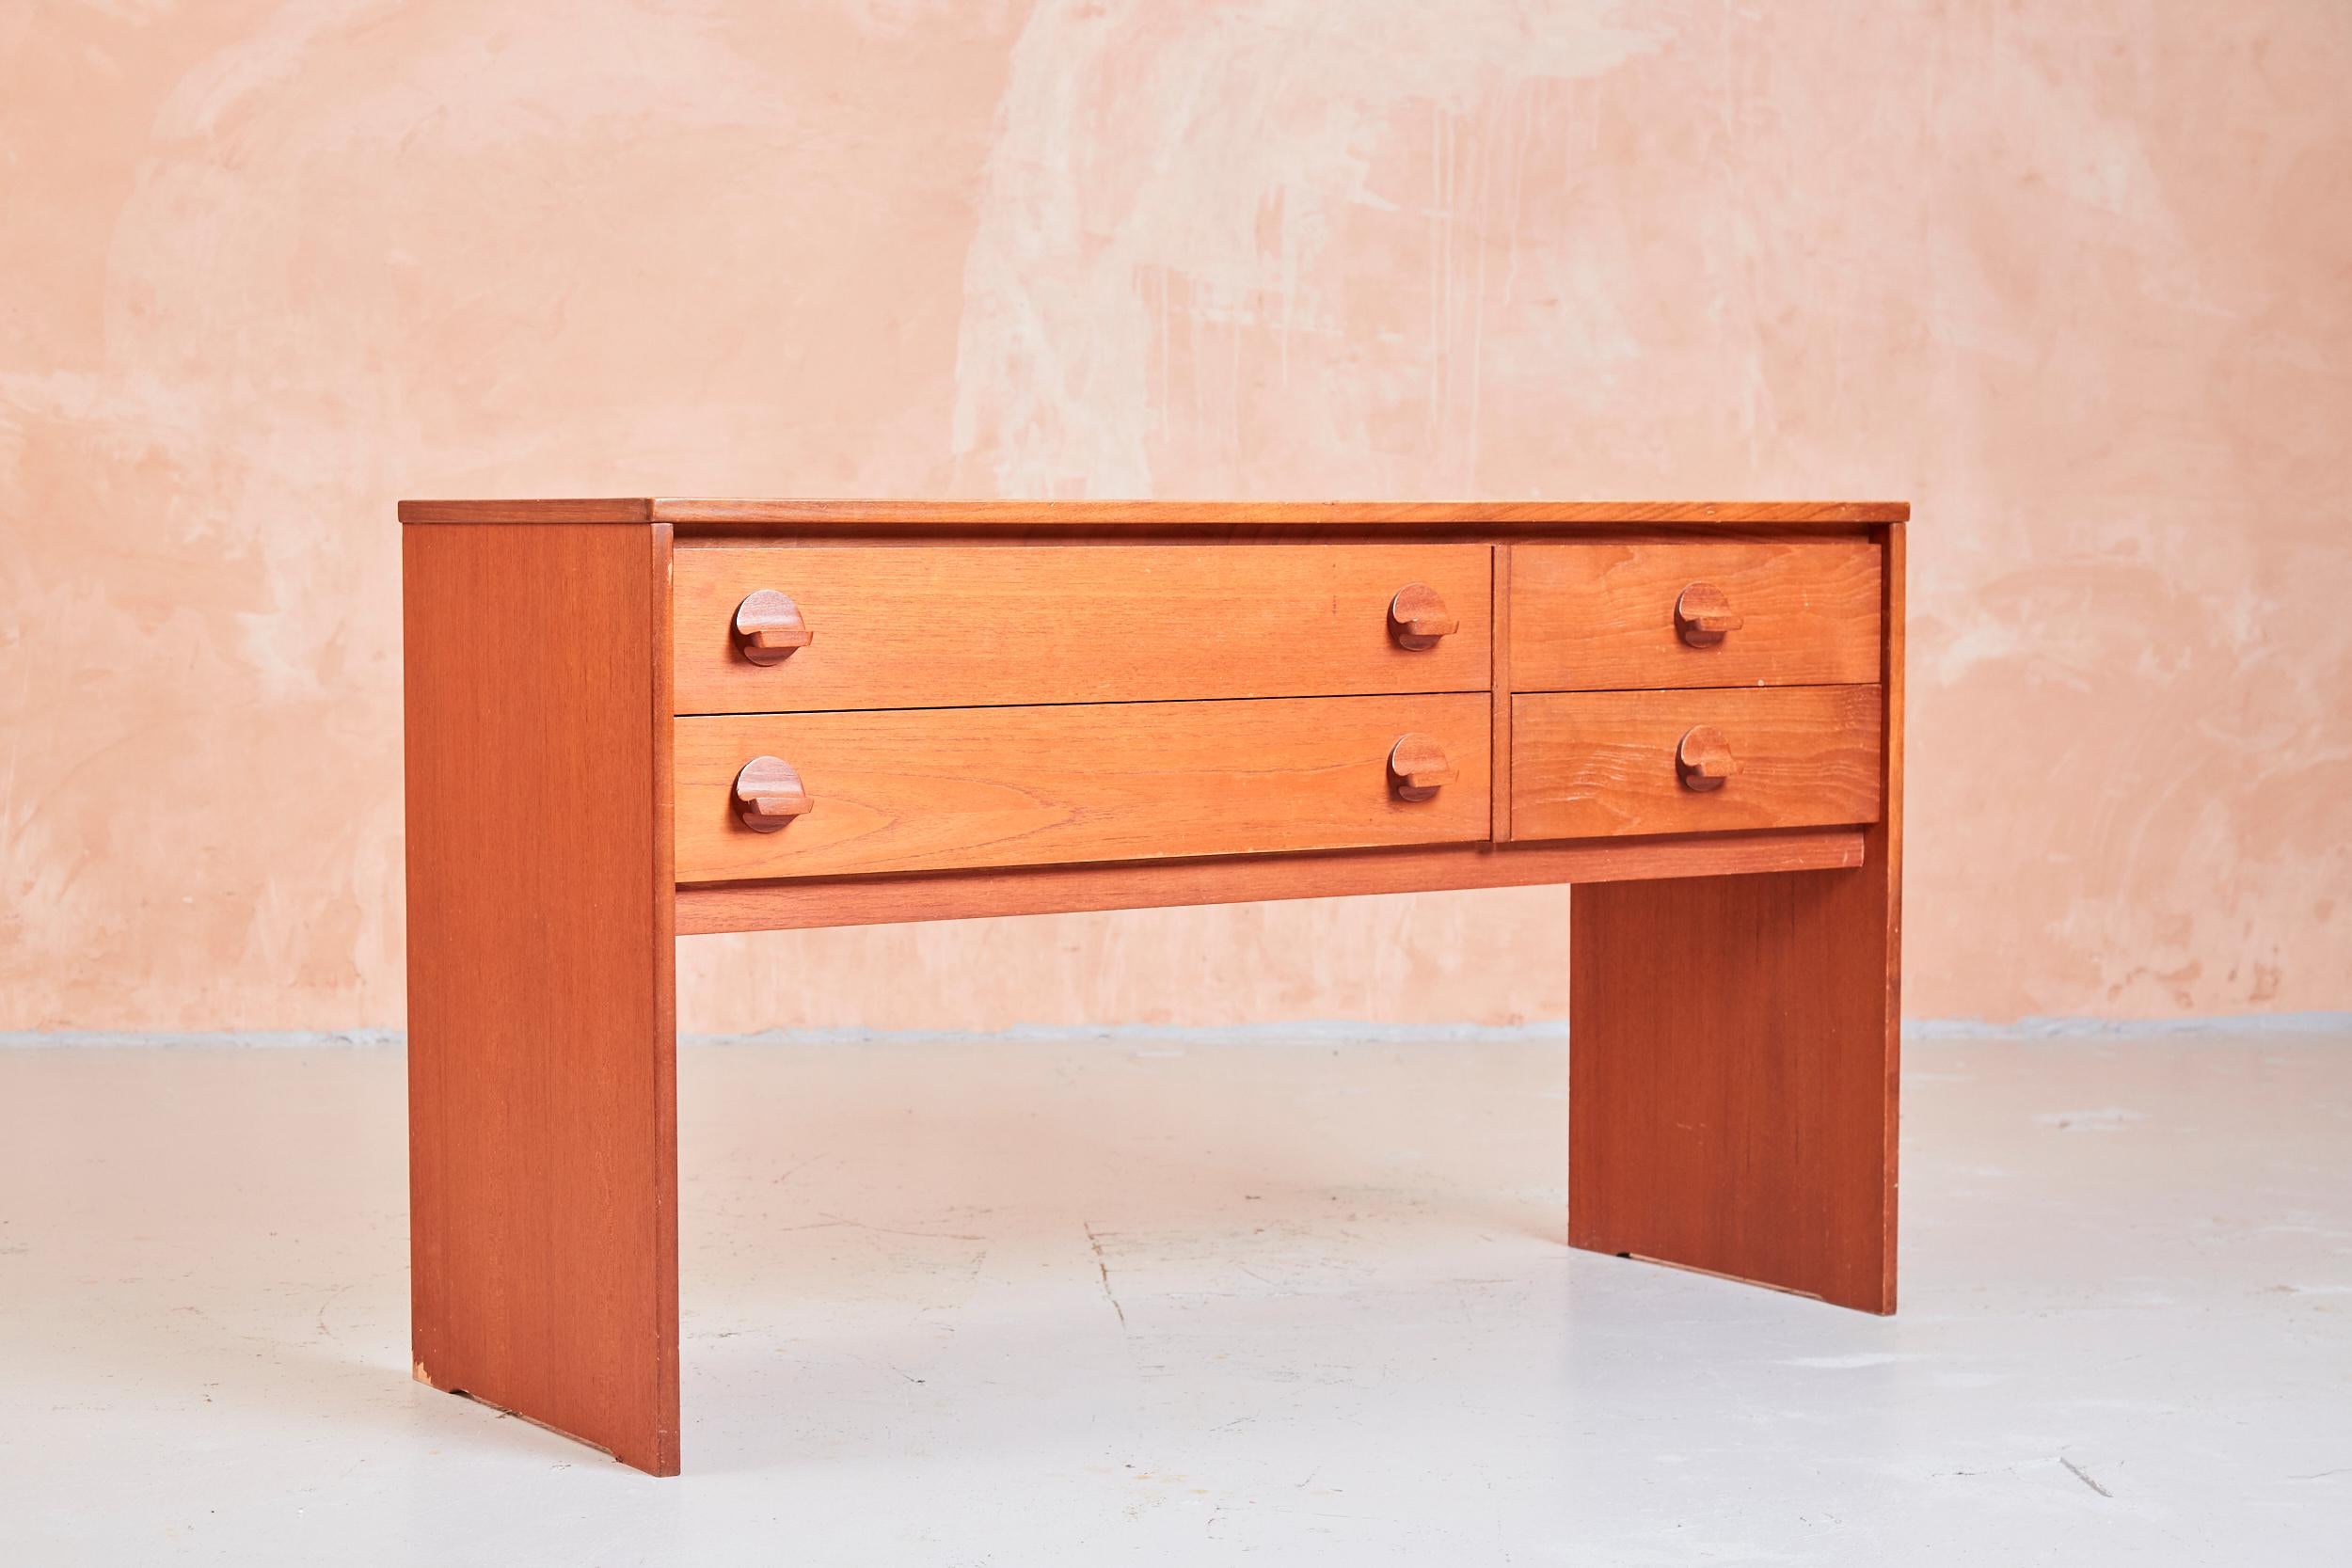 Mid century teak Stag console or dressing table with wooden handles

This is an excellent piece of furniture from the well known and respected manufacturer Stag.

As with all furniture produced by Stag this is a well made piece.

Ron Carter, 1926 -